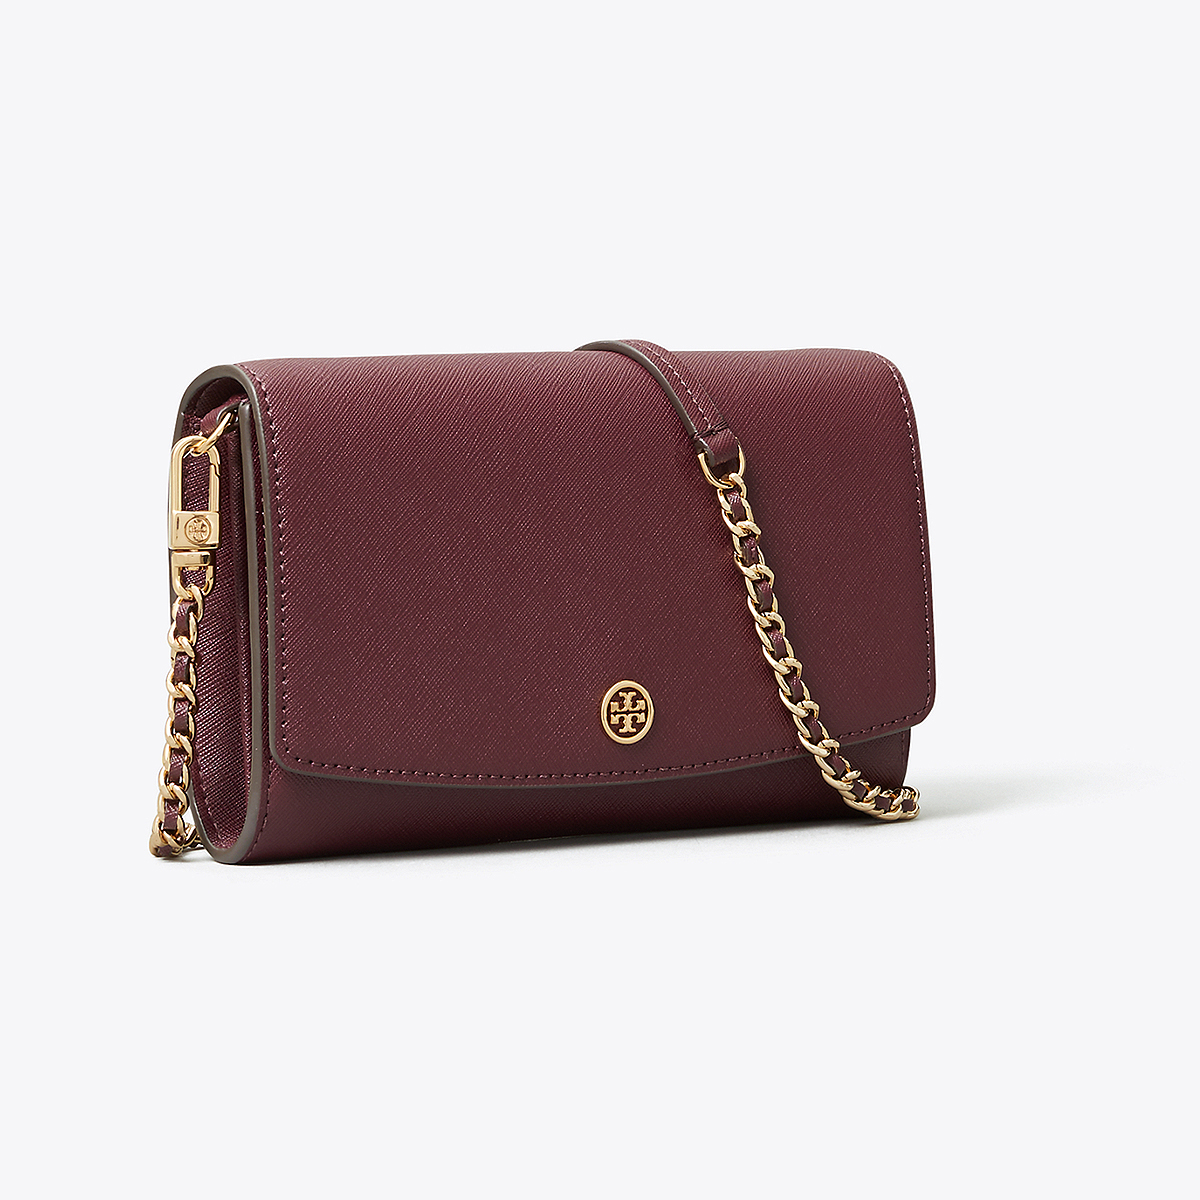 5 Pieces You Need to See in the Tory Burch Semi-Annual Sale